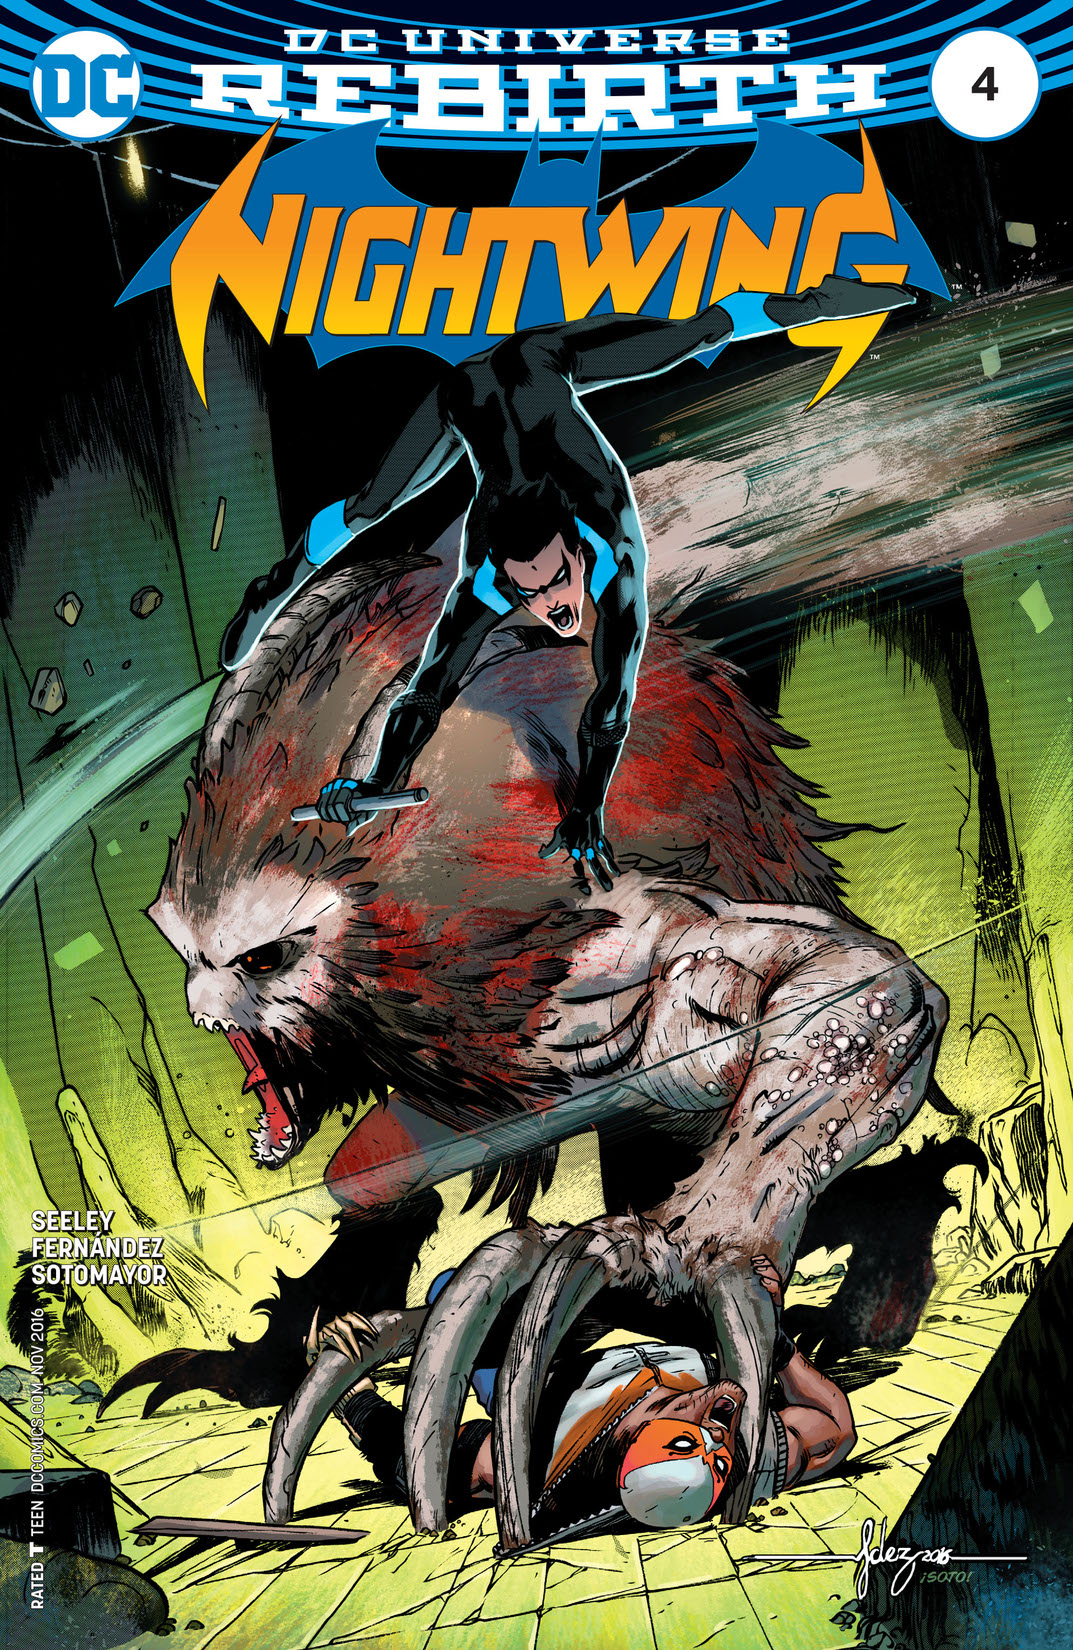 Nightwing (2016-) #4 preview images